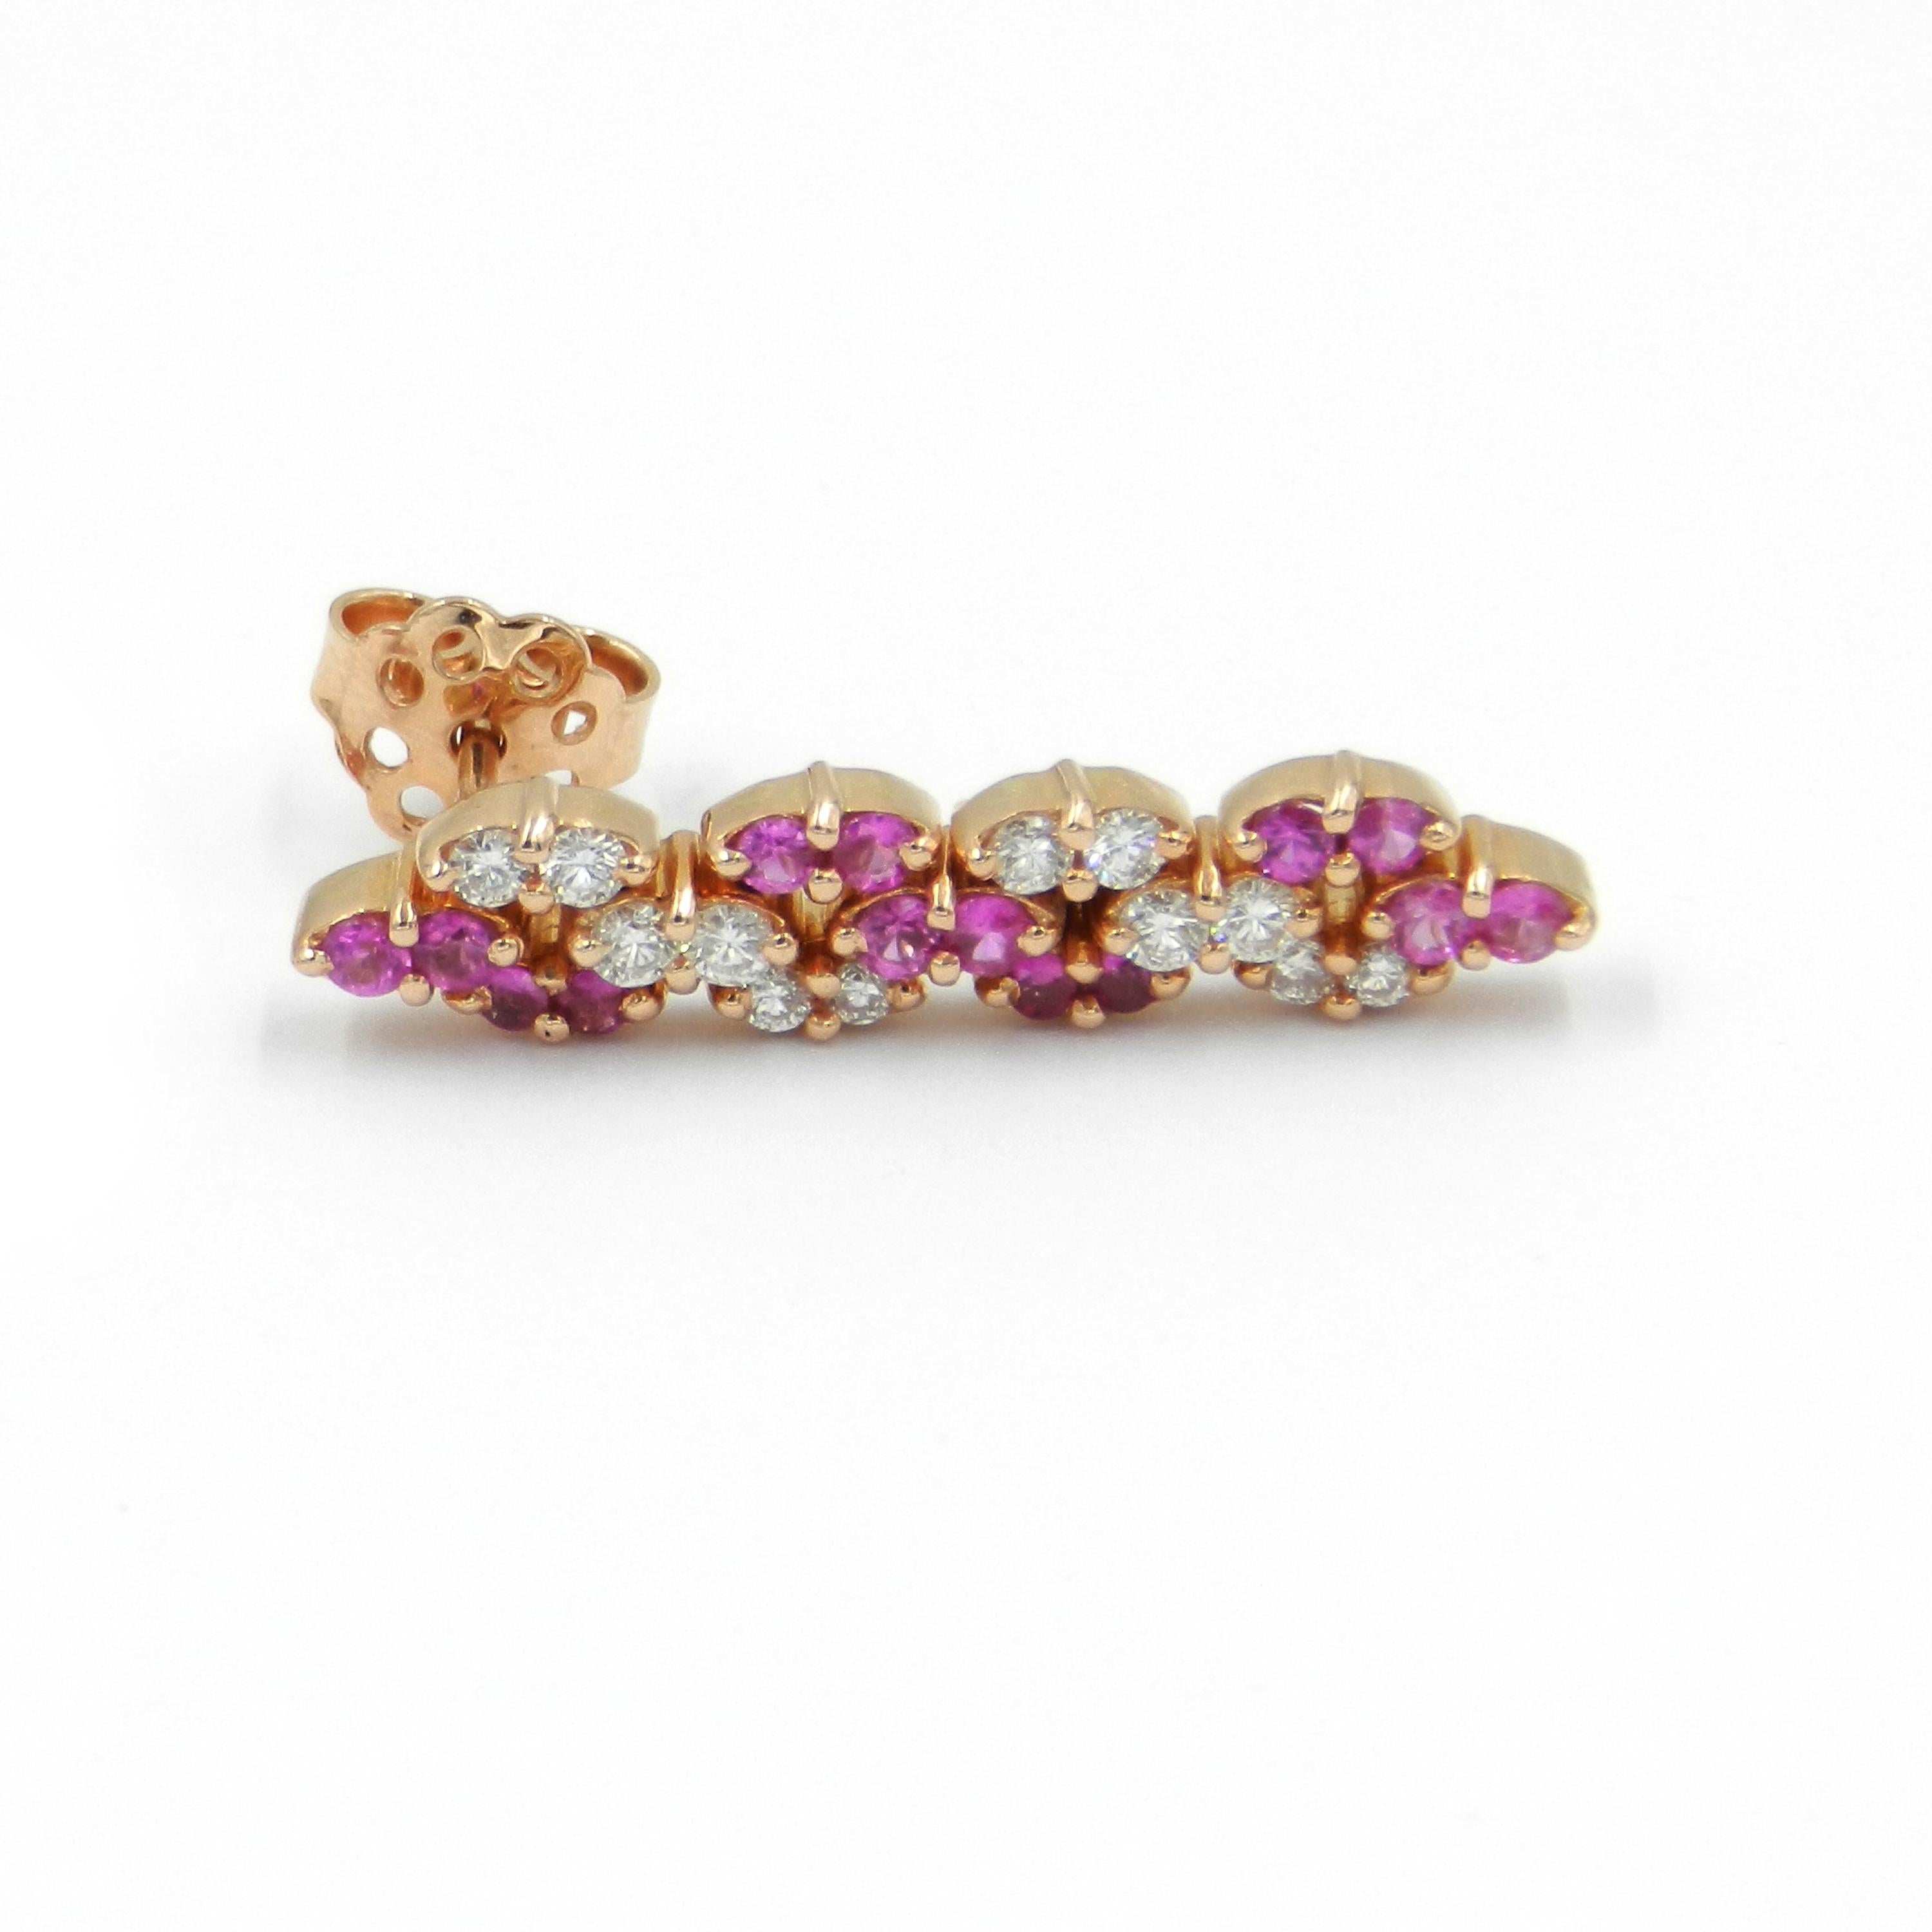 Contemporary 18 Karat Rose Gold White Diamonds and Pink Sapphires Garavelli Dangling Earrings For Sale